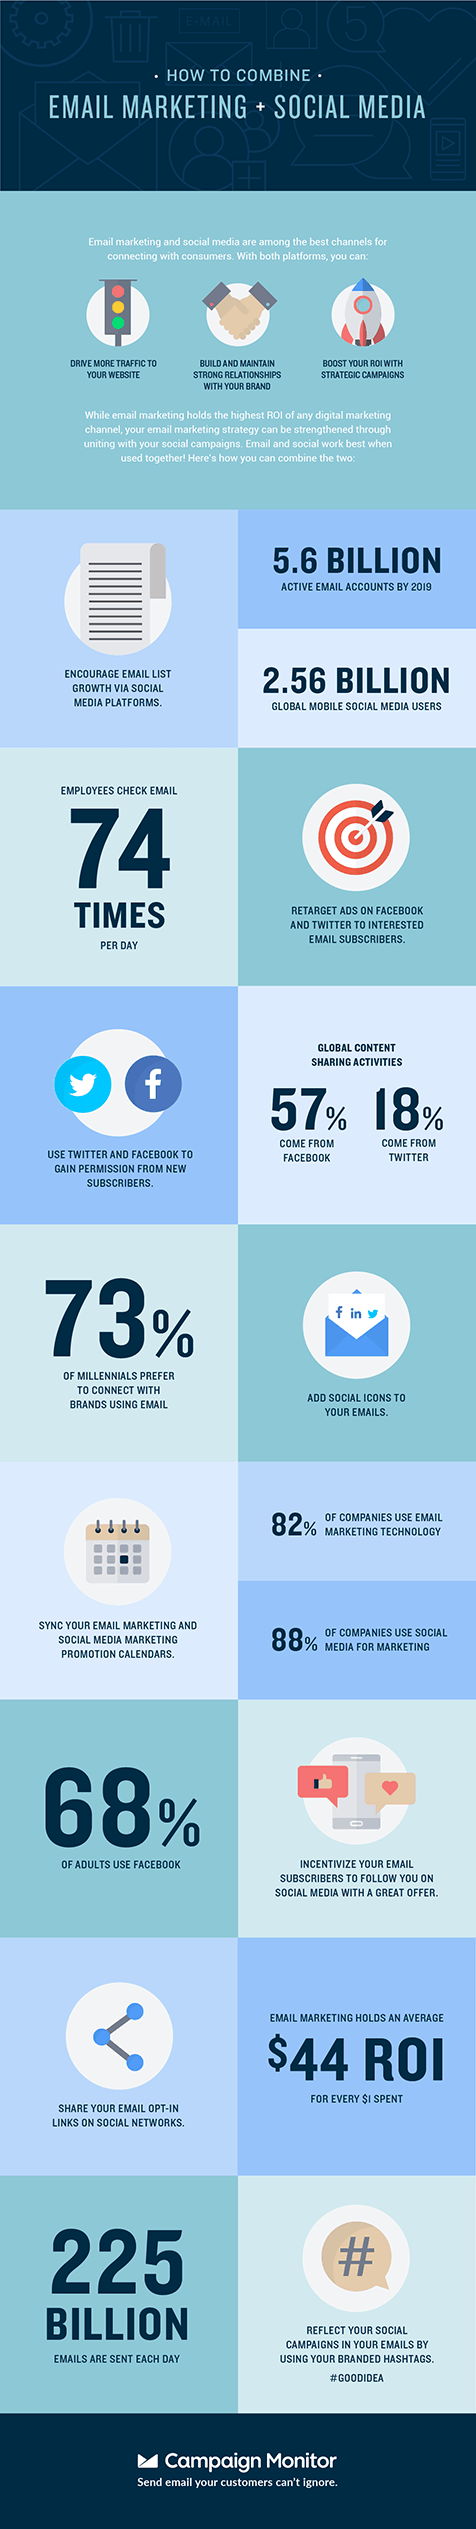 A Detailed Infographic on How You Can Combine Email Marketing and Social Media